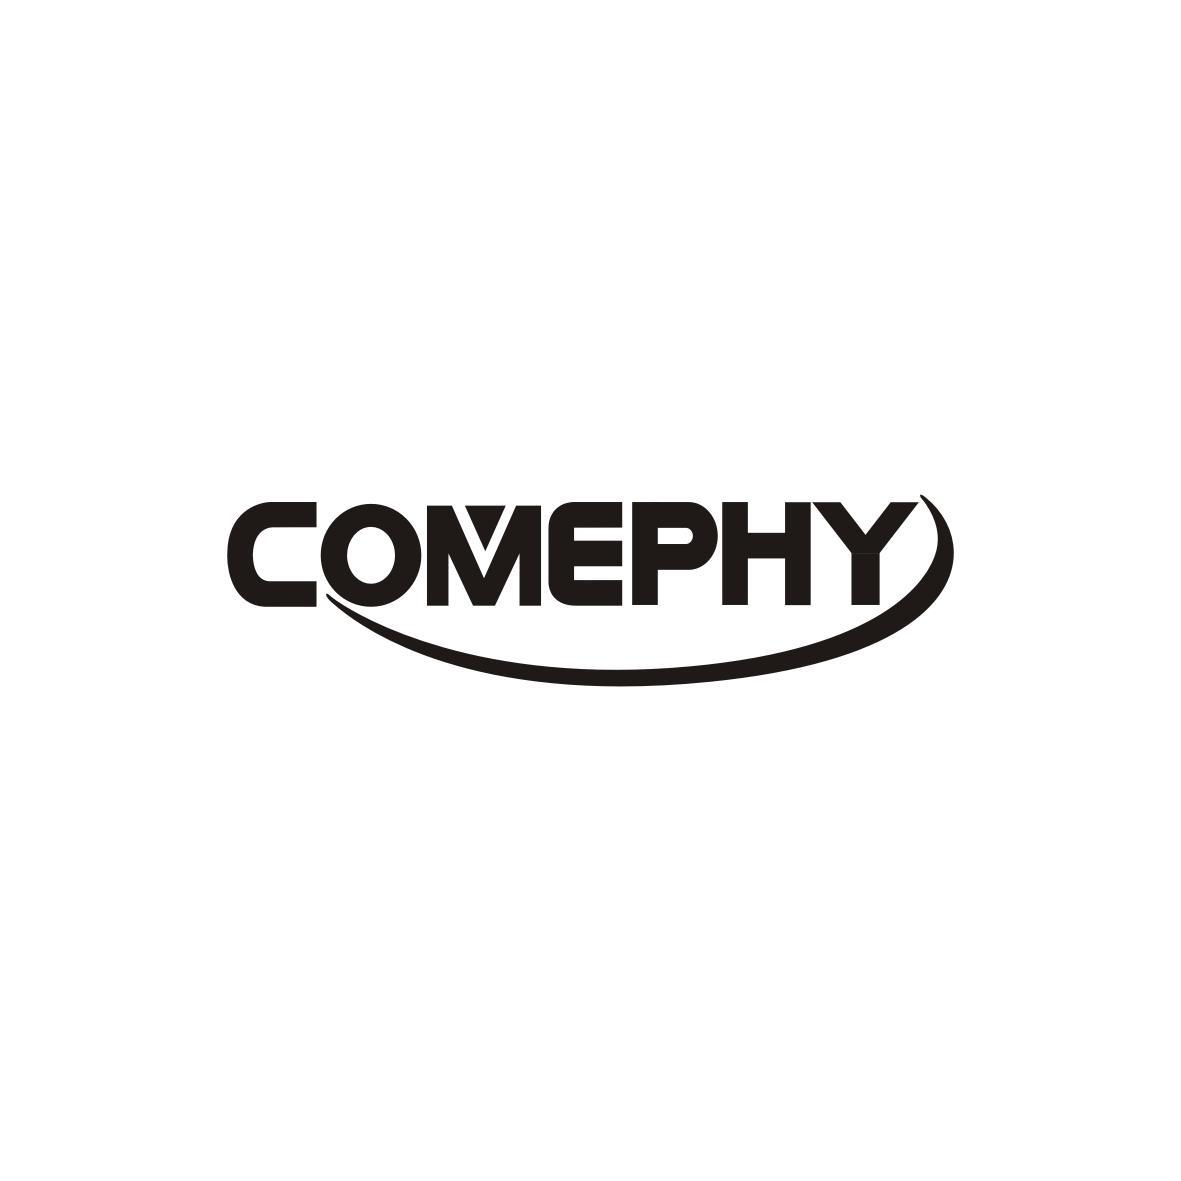 COMEPHY